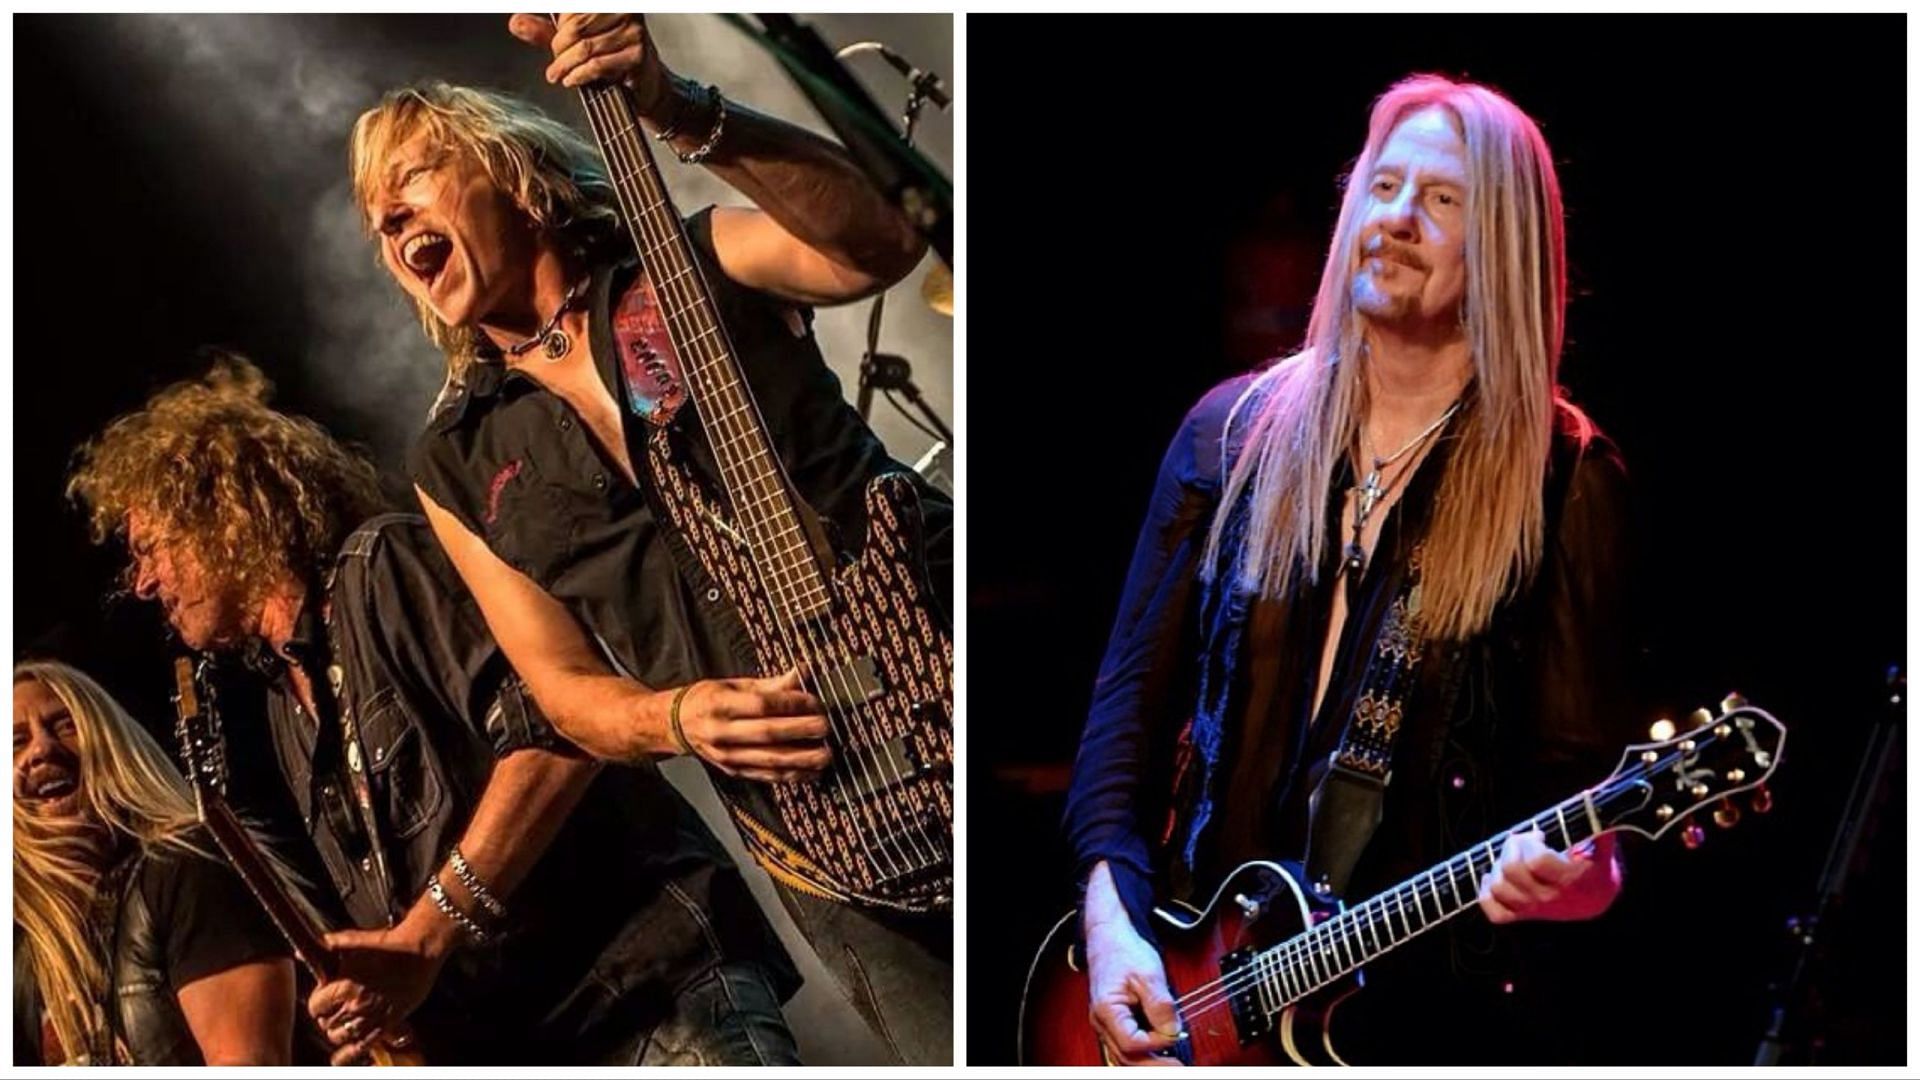 Two Portraits of Y&amp;T (Images via official Instagram of Y&amp;T guitarist John Nymann @johnnymaniac)